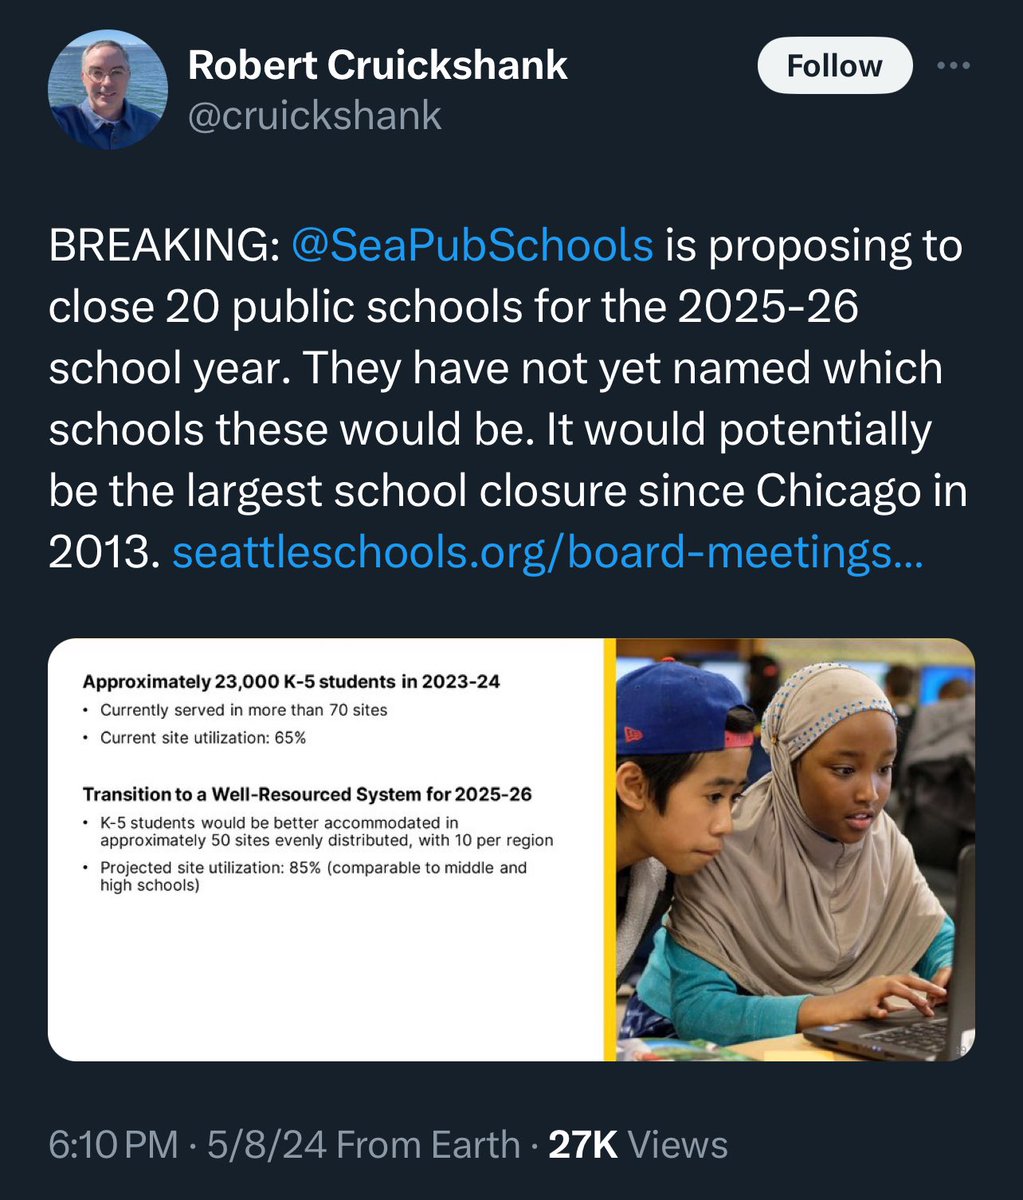 The inevitable result of turning schools into Marxist indoctrination centers. Parents don’t want it. Taxpayers won’t fund it. Yes, even in Seattle, parents want their children to be able to read and do math.